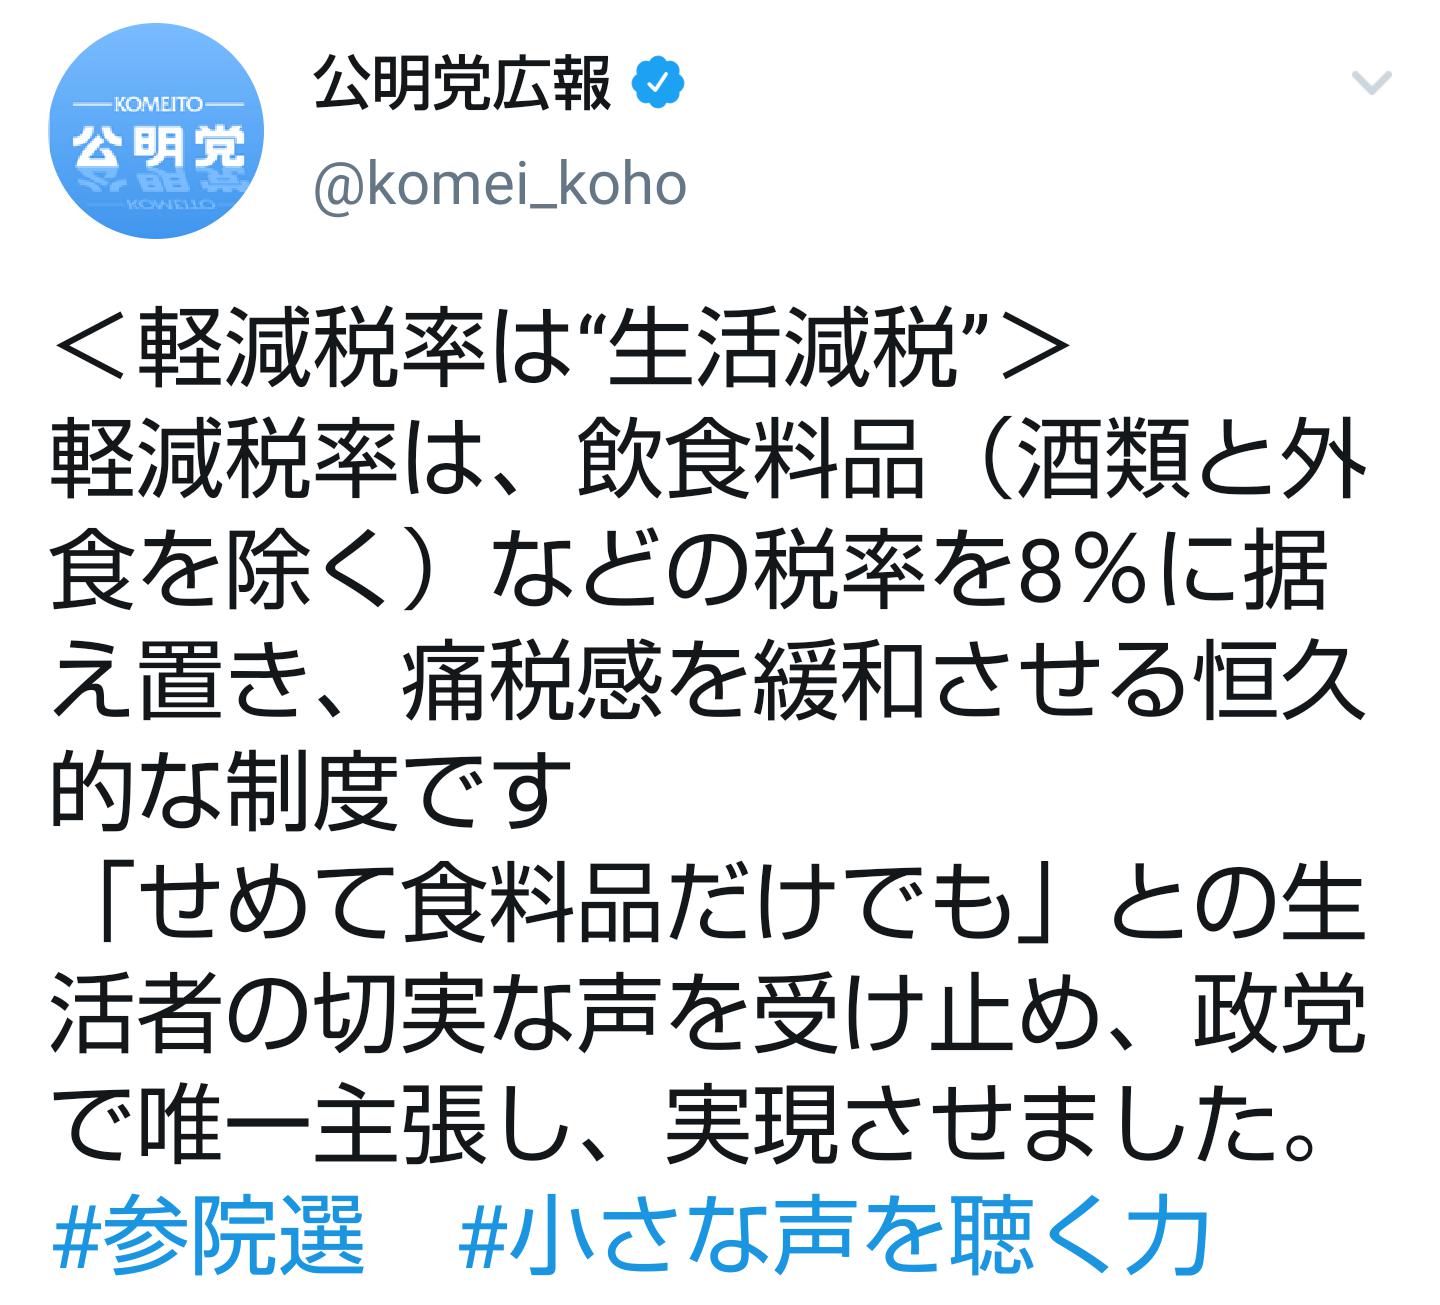 [Sad news] Komeito “Achieving a reduced tax rate with our power!” → People “dead” → Komeito “The Democrats made the reduced tax rate”